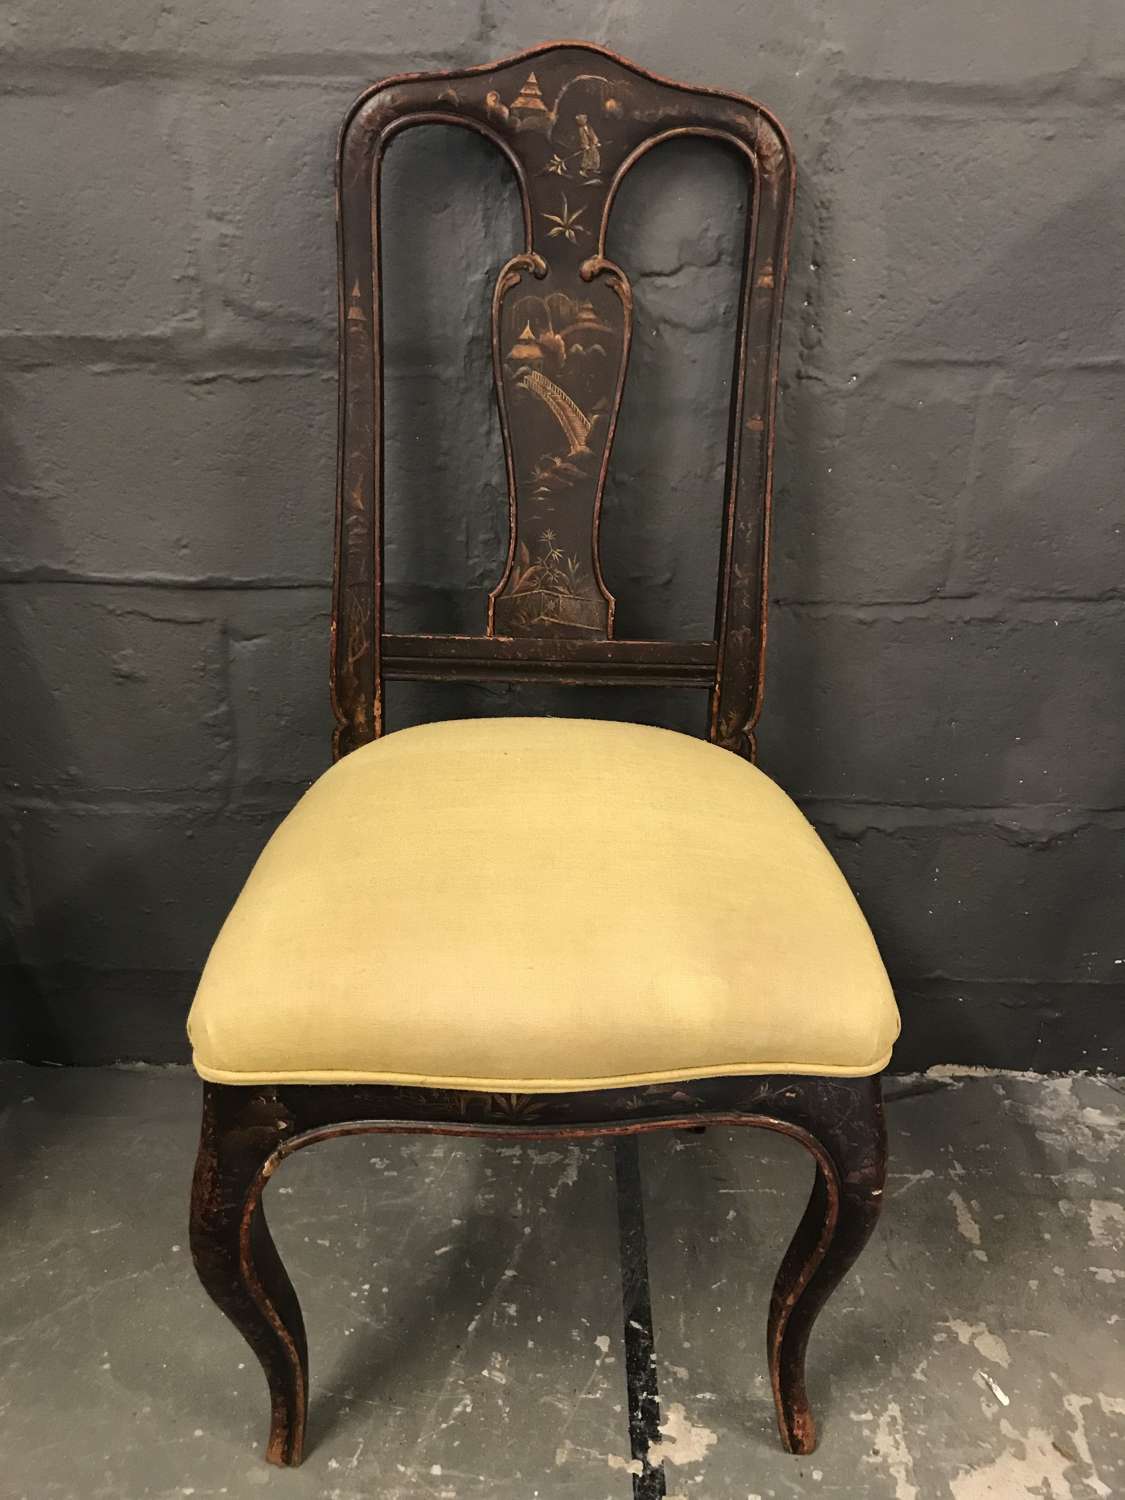 Antique painted side chair with chinoiserie design